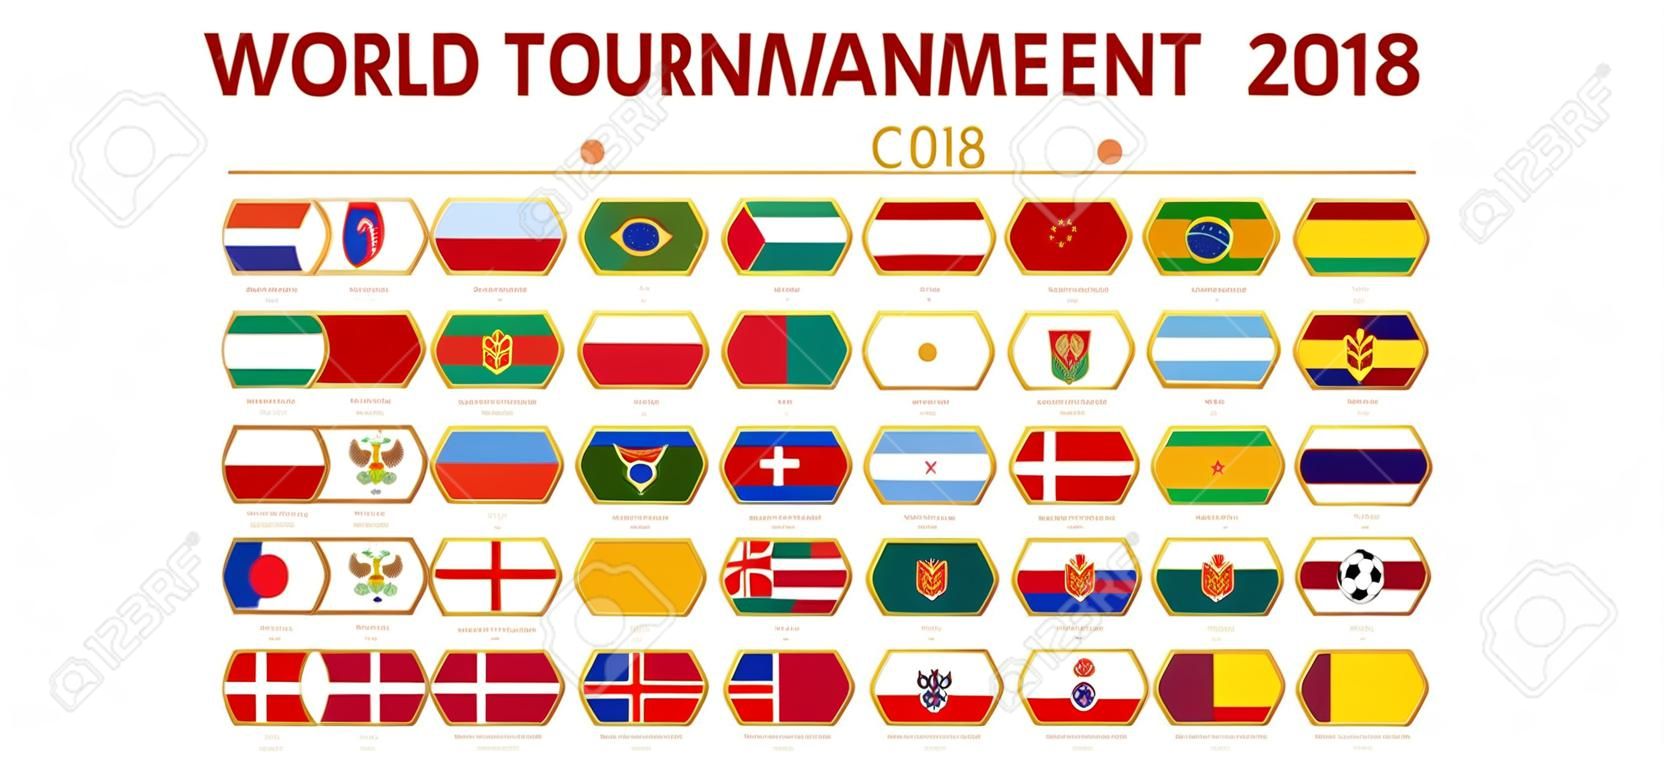 Football world tournament 2018 in Russia, flags of all participants by group 